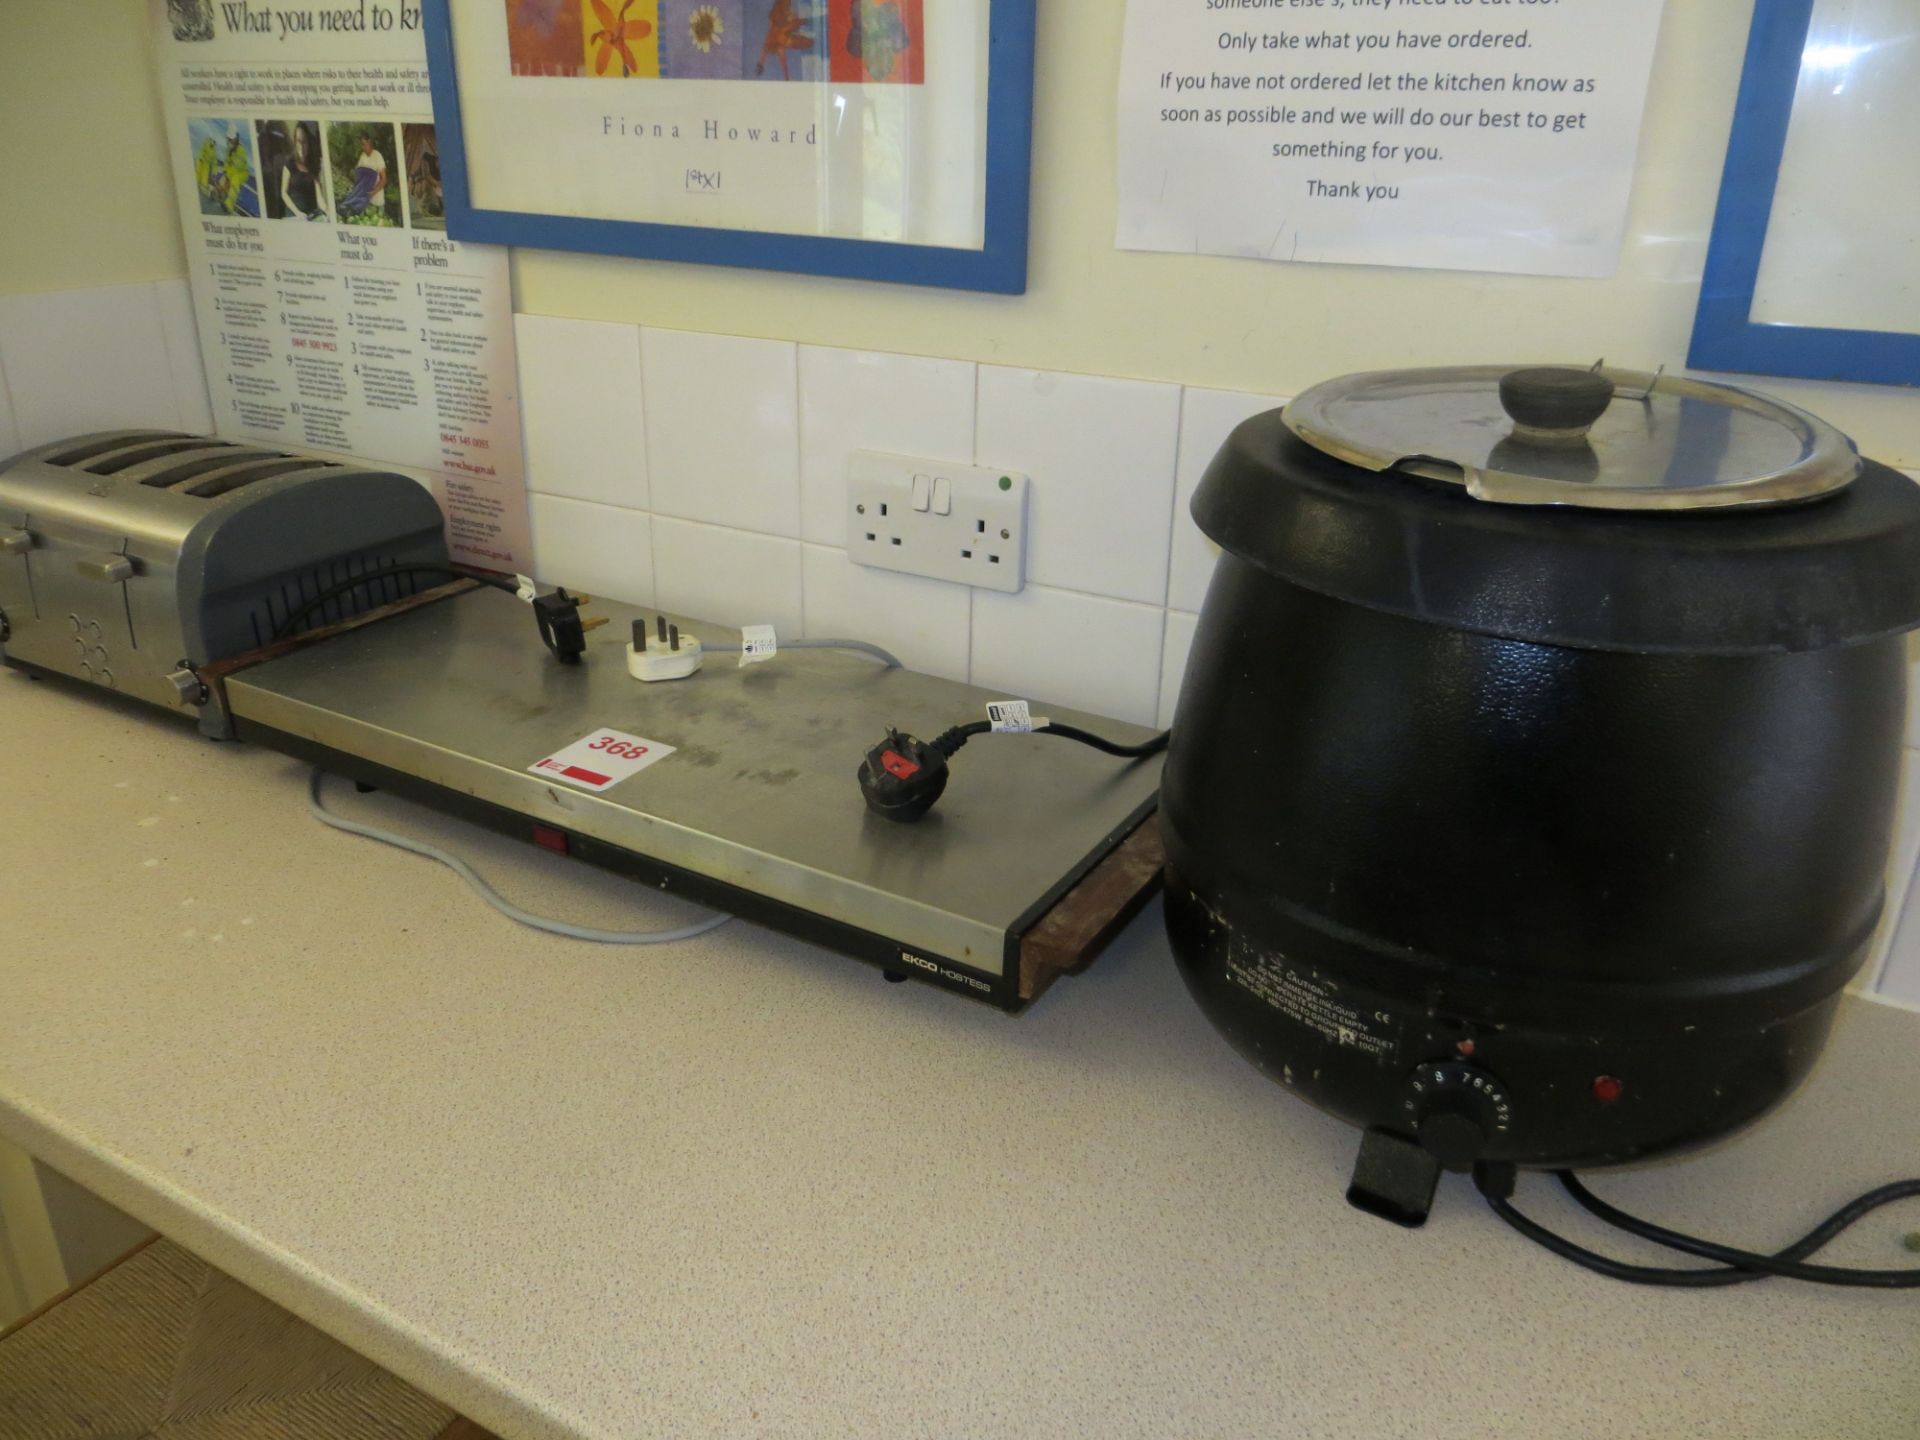 Soup warmer, hotplate & toaster